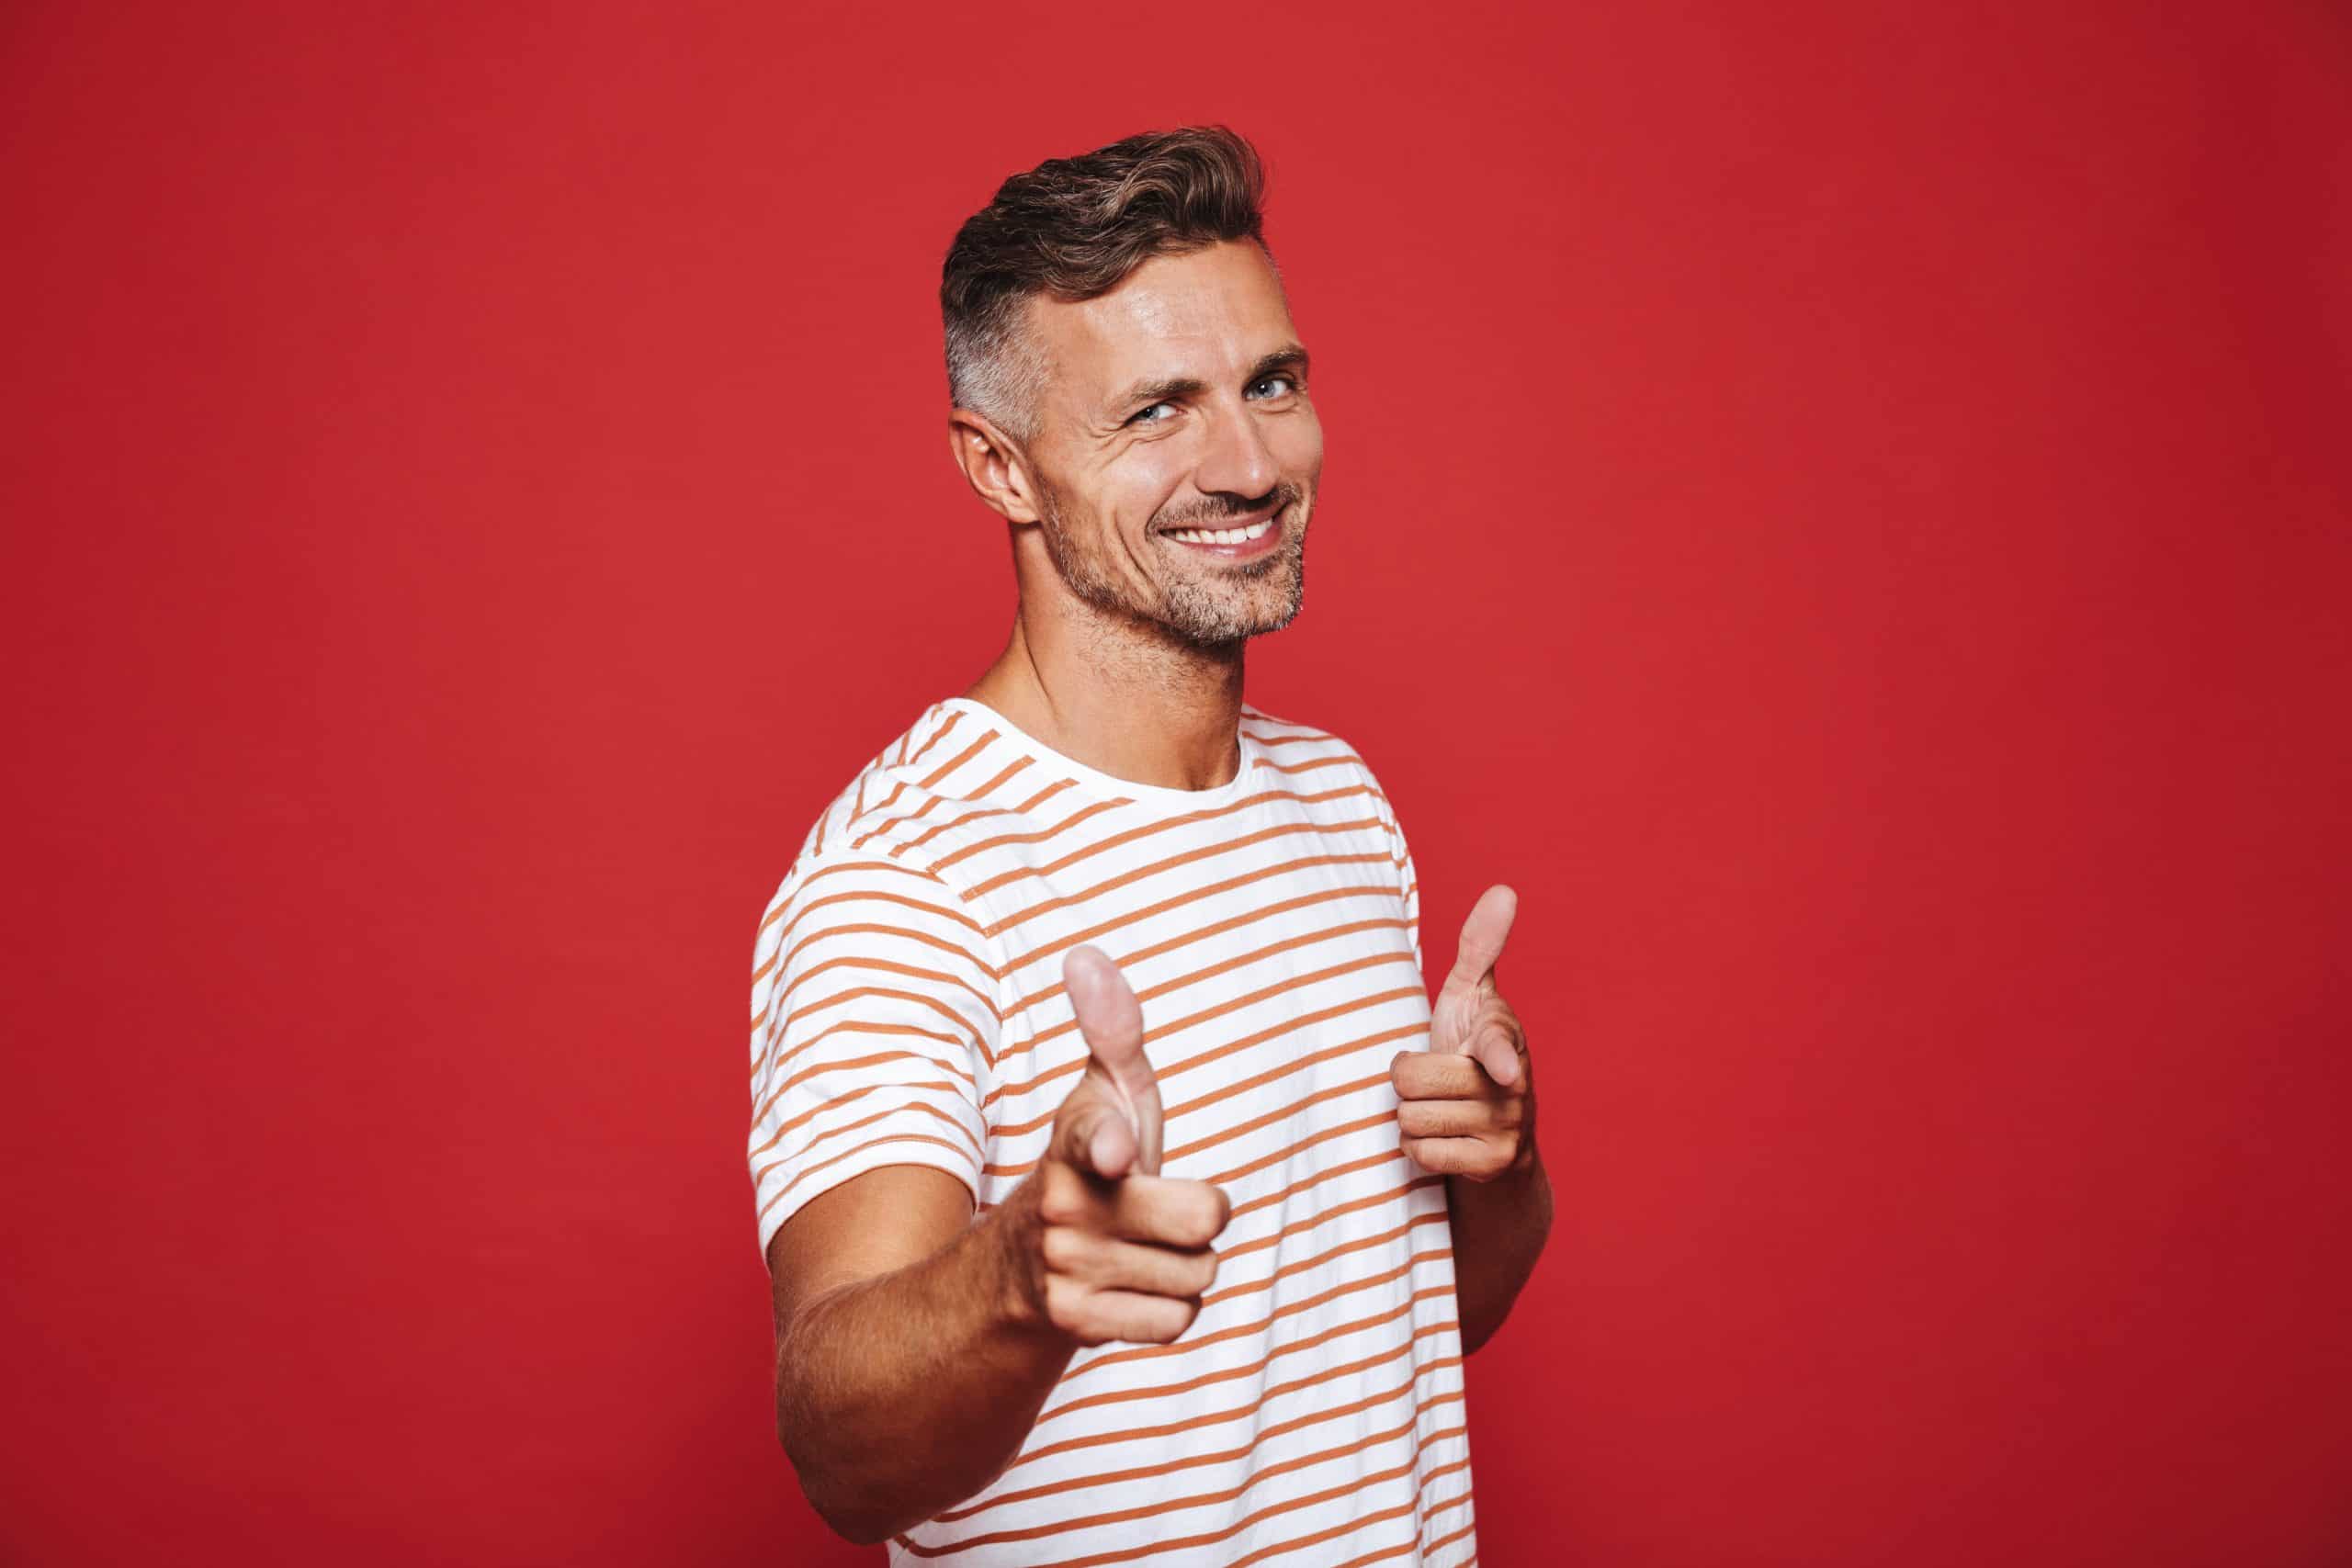 A man giving a thumbs up with a red background